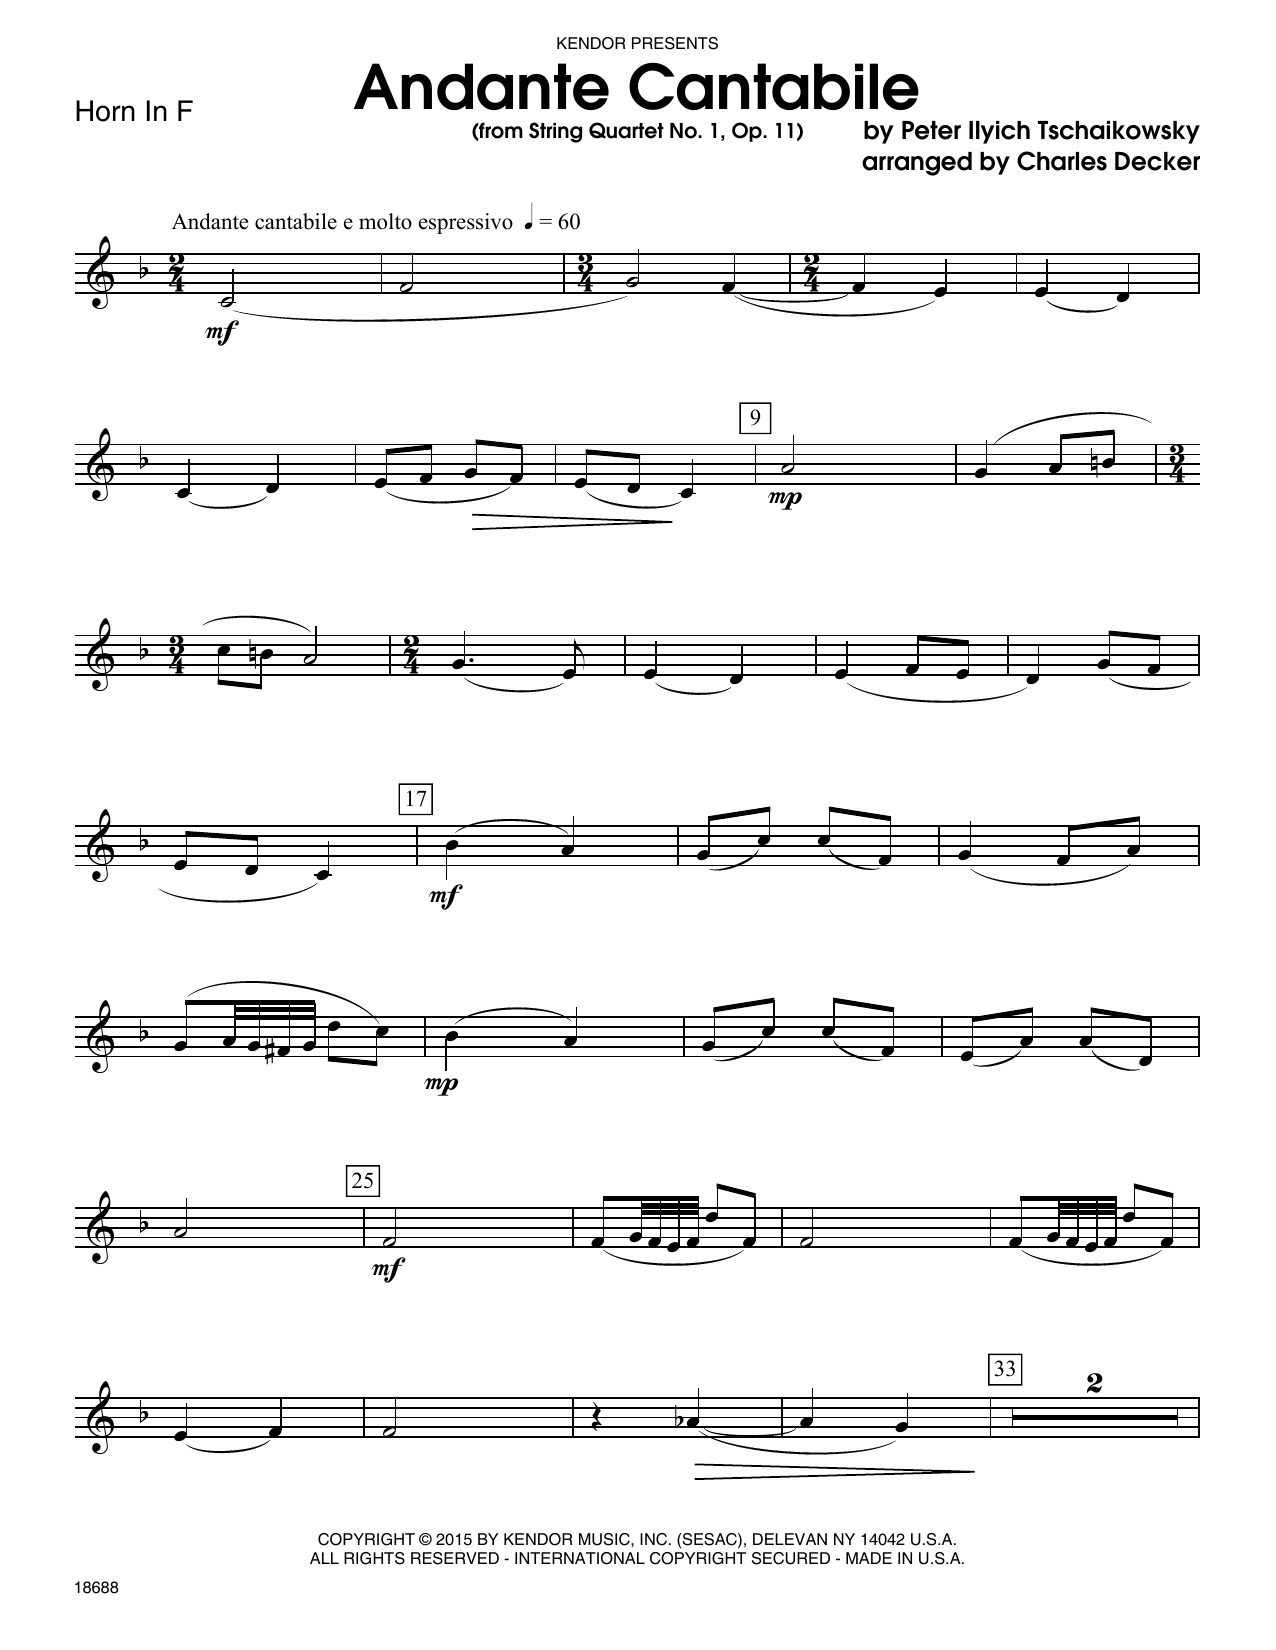 Charles Decker Andante Cantabile (from String Quartet No. 1, Op. 11) - Horn in F sheet music notes and chords. Download Printable PDF.